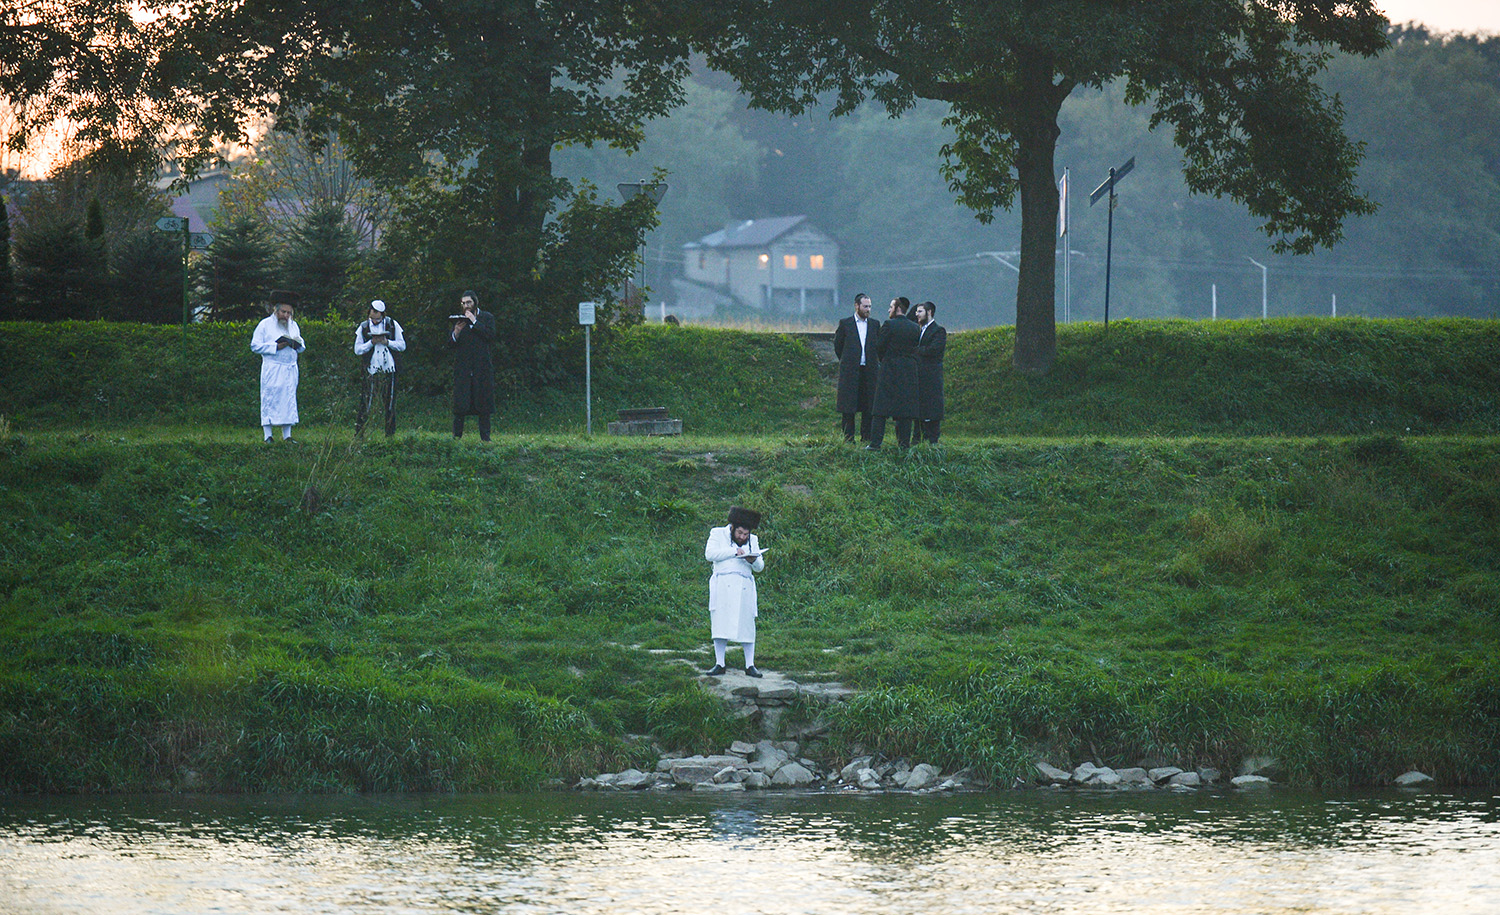 Orthodox Jews praying on the last day of Rosh Hashanah on the bank of the San river in Dynow, Poland on Sunday, September 20, 2020. Artur Widak/NurPhoto via Getty Images.
